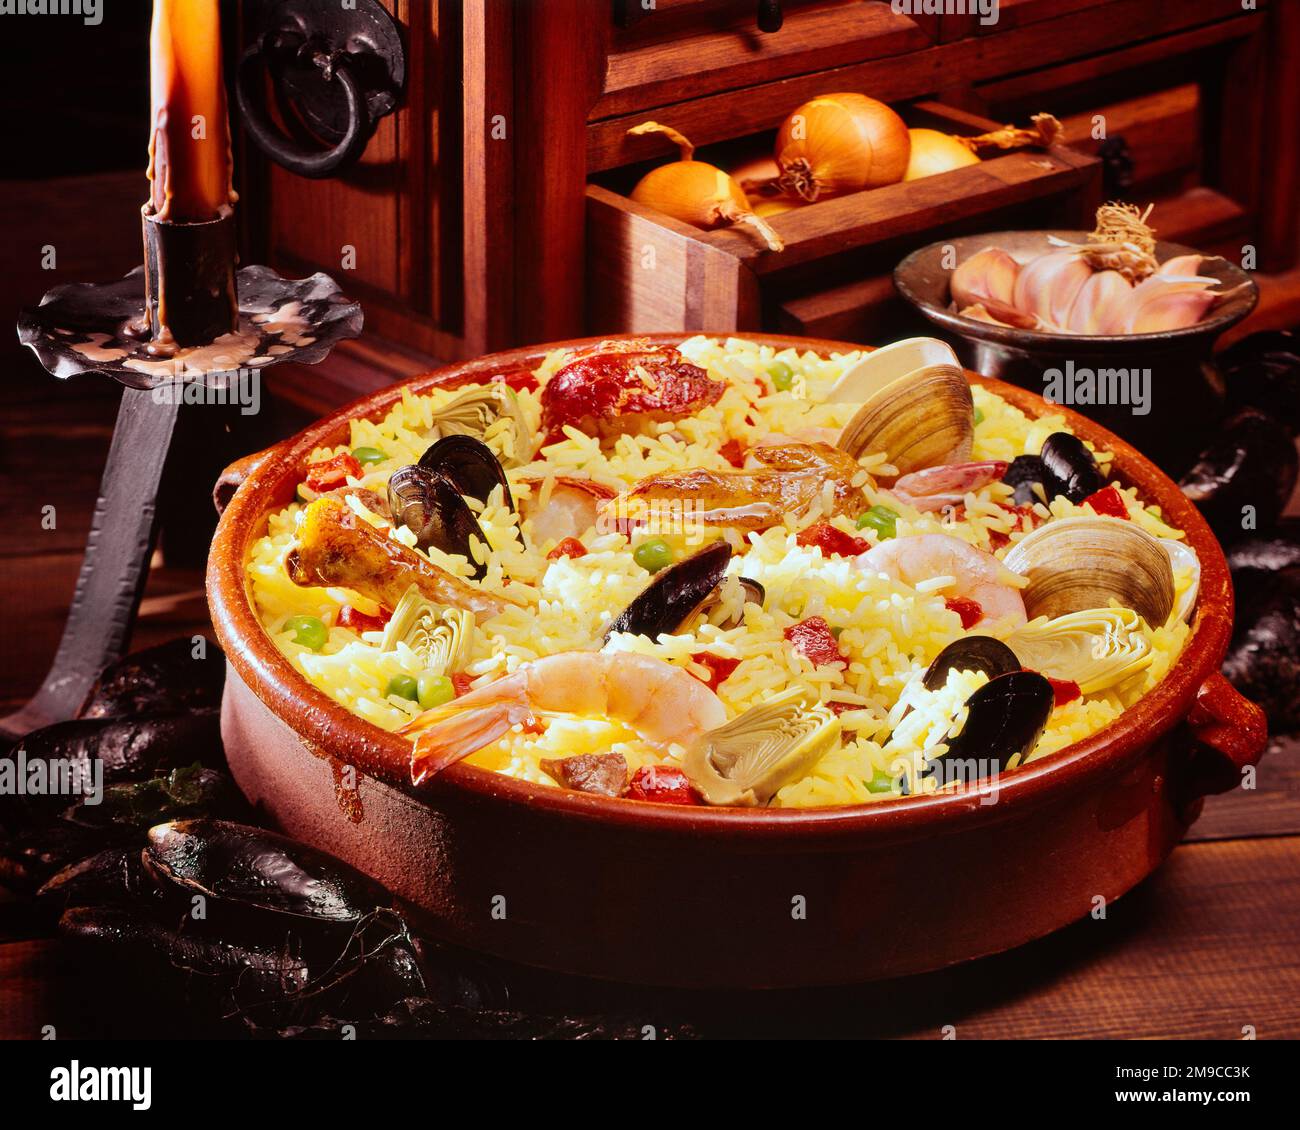 1980s PAELLA SPANISH MEDITERRANEAN DISH OF RICE SAFFRON CHICKEN SEAFOOD SHRIMP MUSSELS SERVED IN SHALLOW TERRA COTTA CASSEROLE  - kf21254 PHT001 HARS SEAFOOD Stock Photo